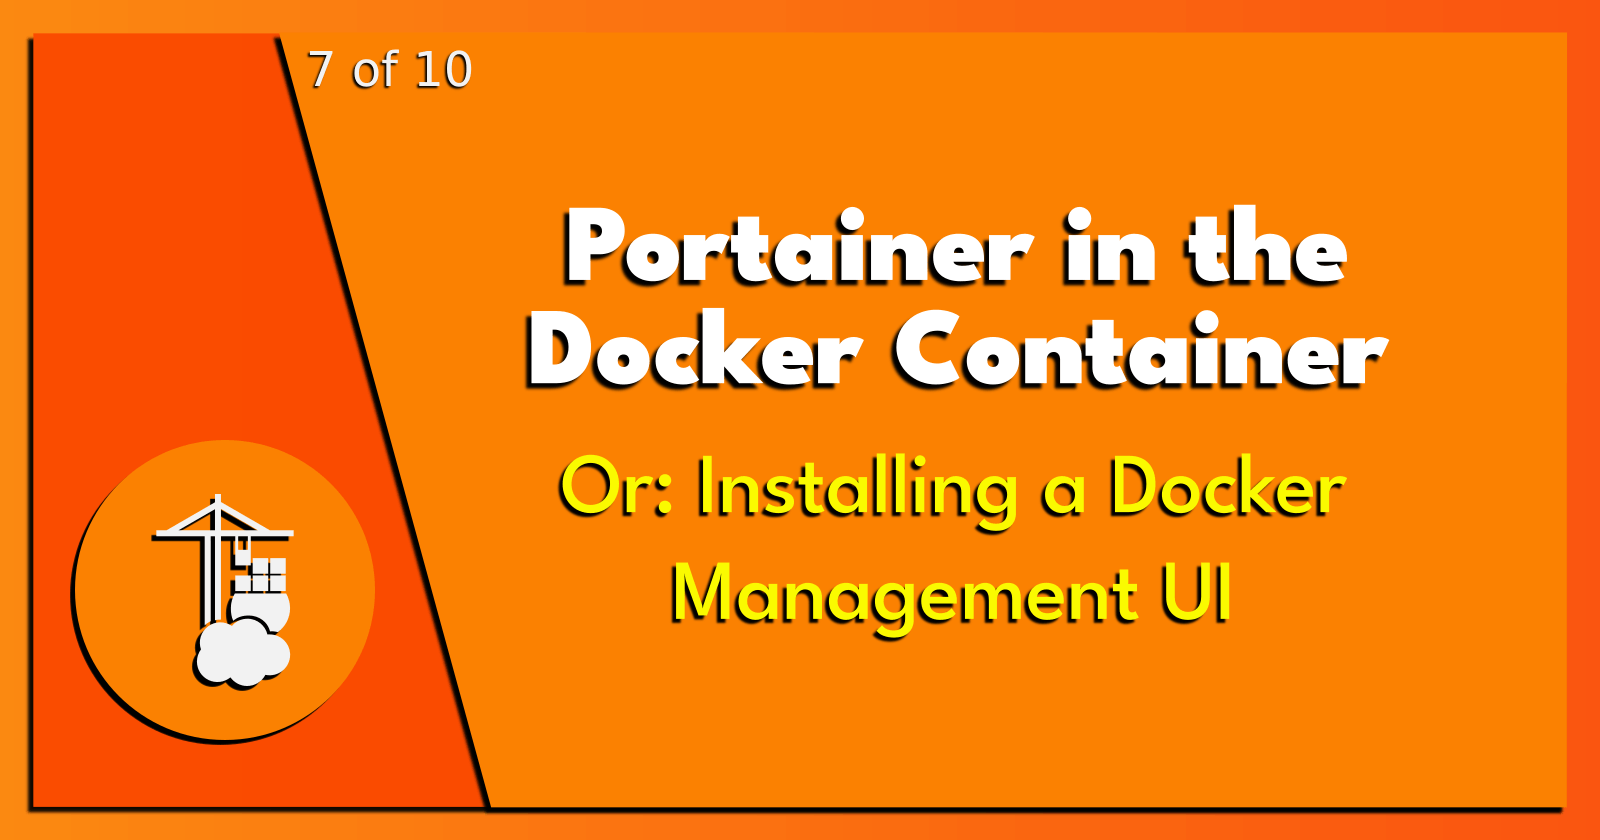 7 of 10: Portainer in the Docker Container.